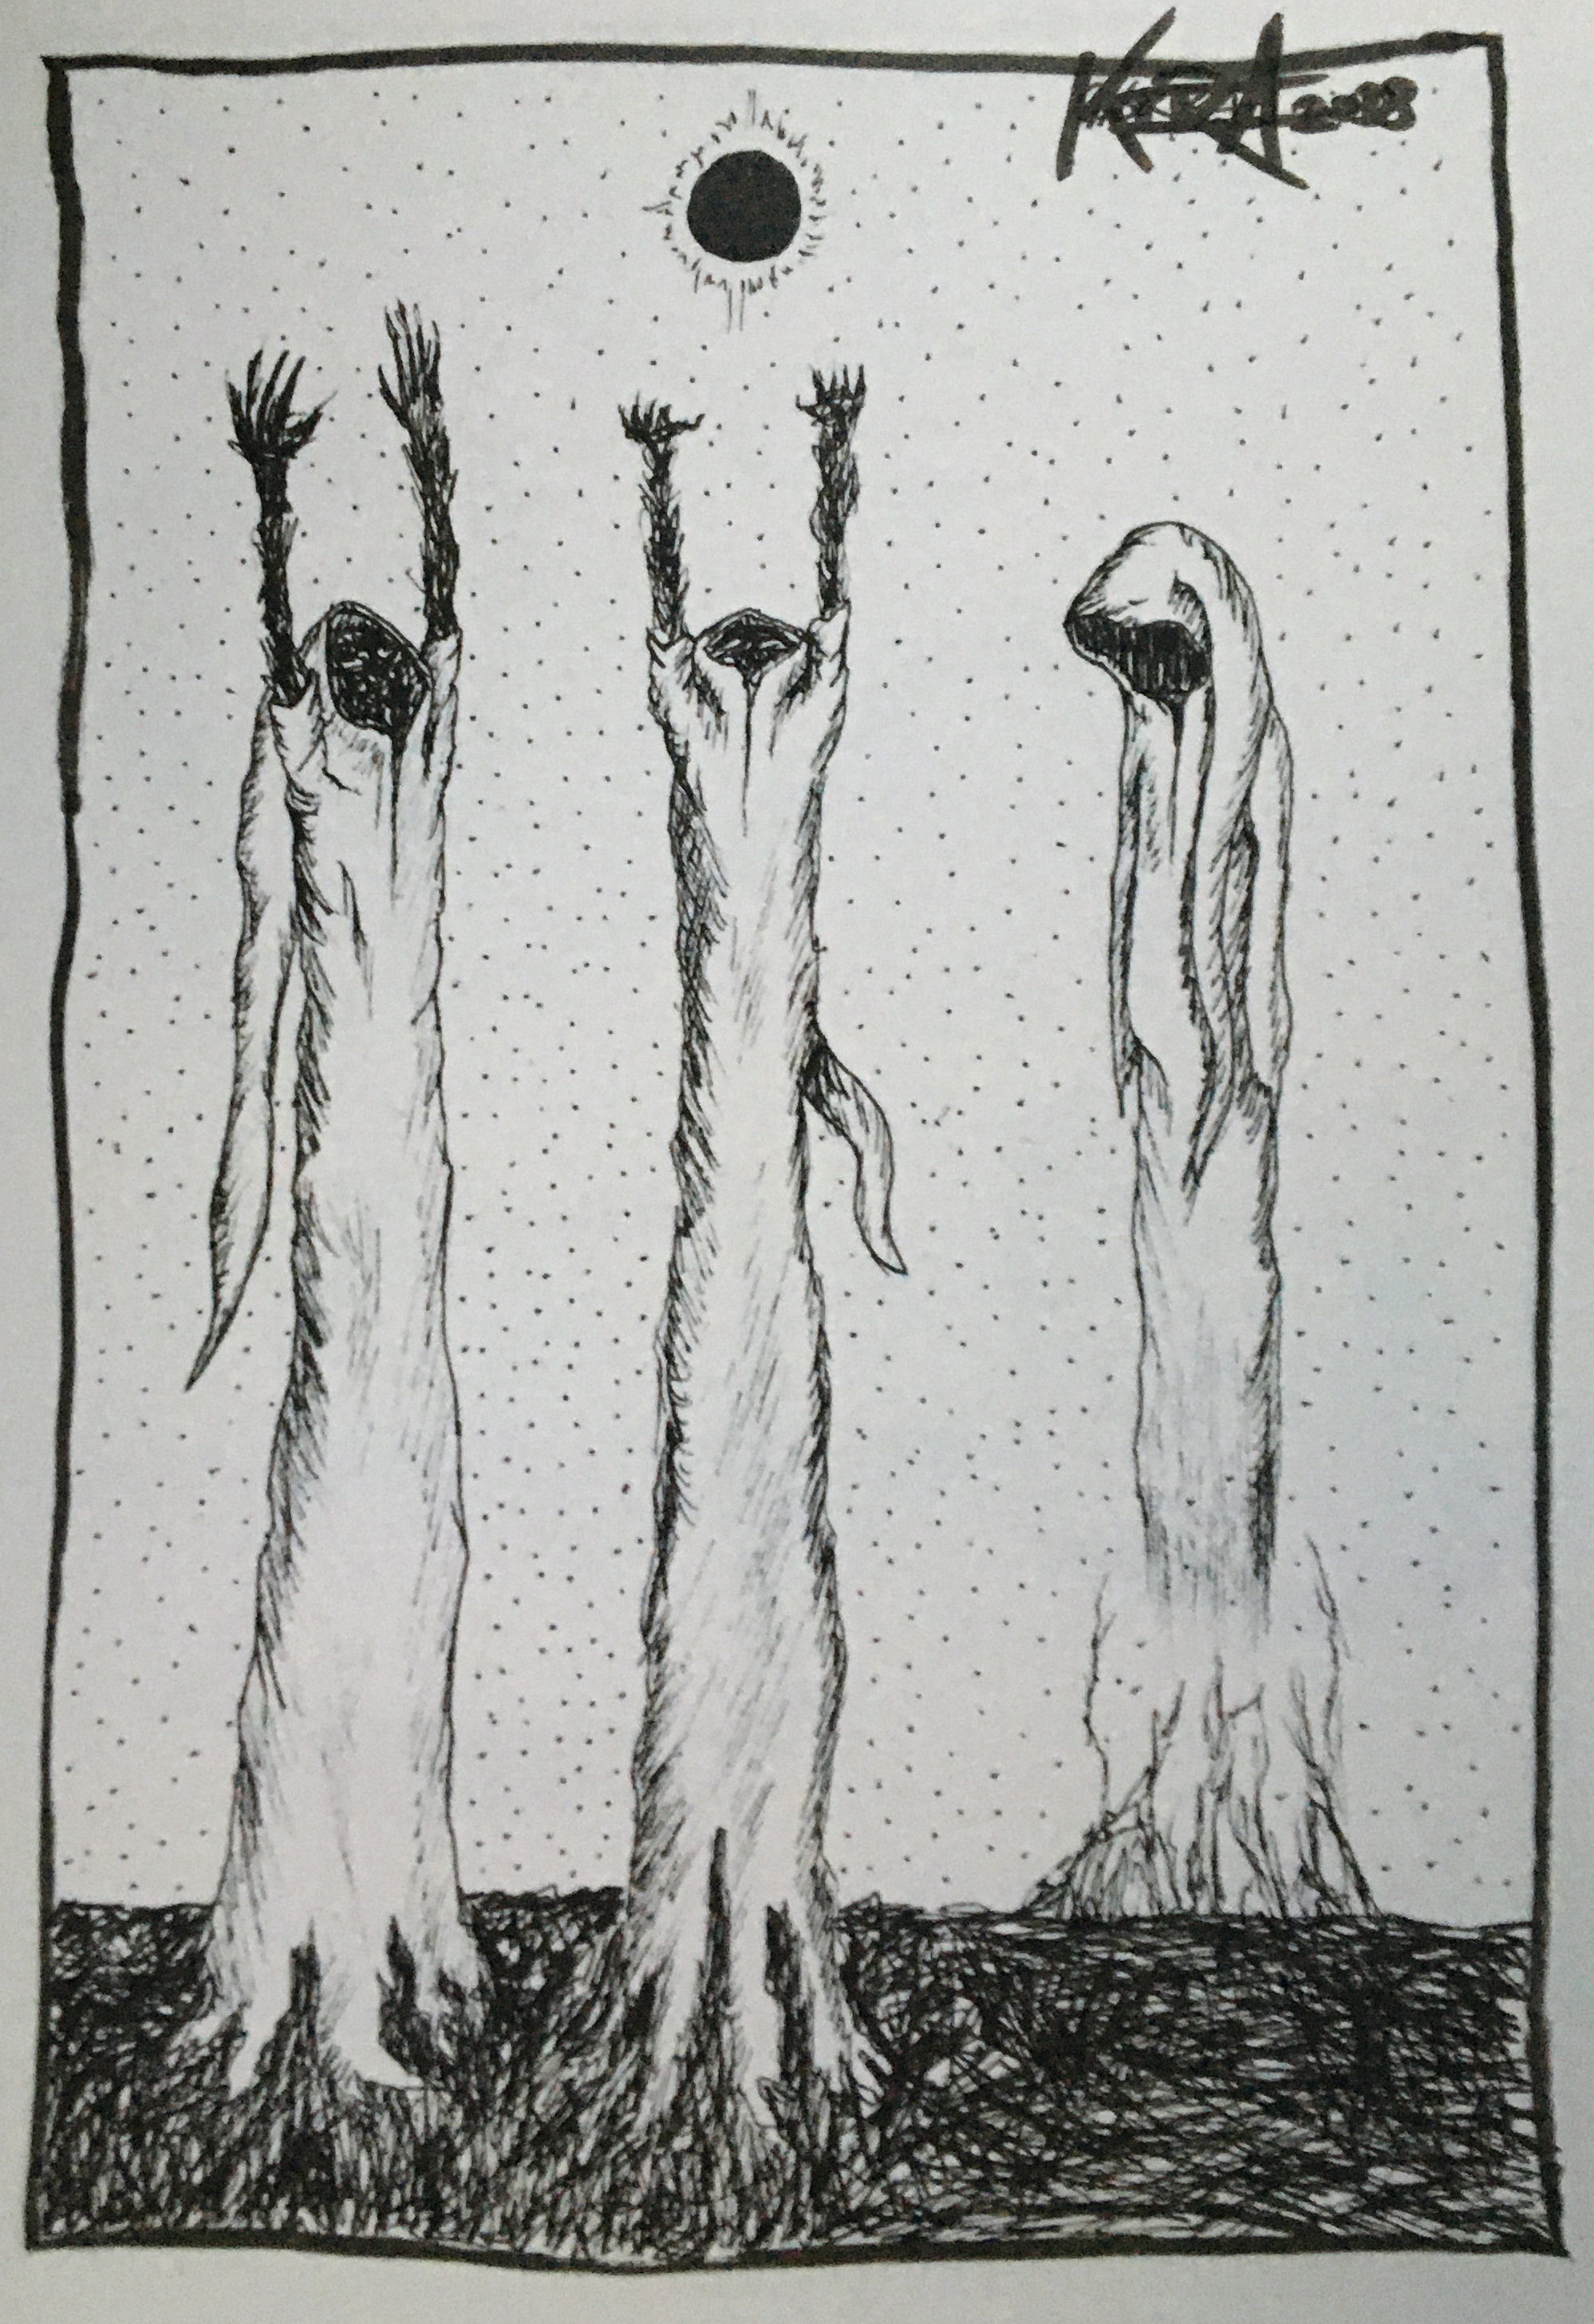 Drawing of three robed figures, the first two with their arms facing up towards a blacked out sun, the third with their head bowed, rising from the ground